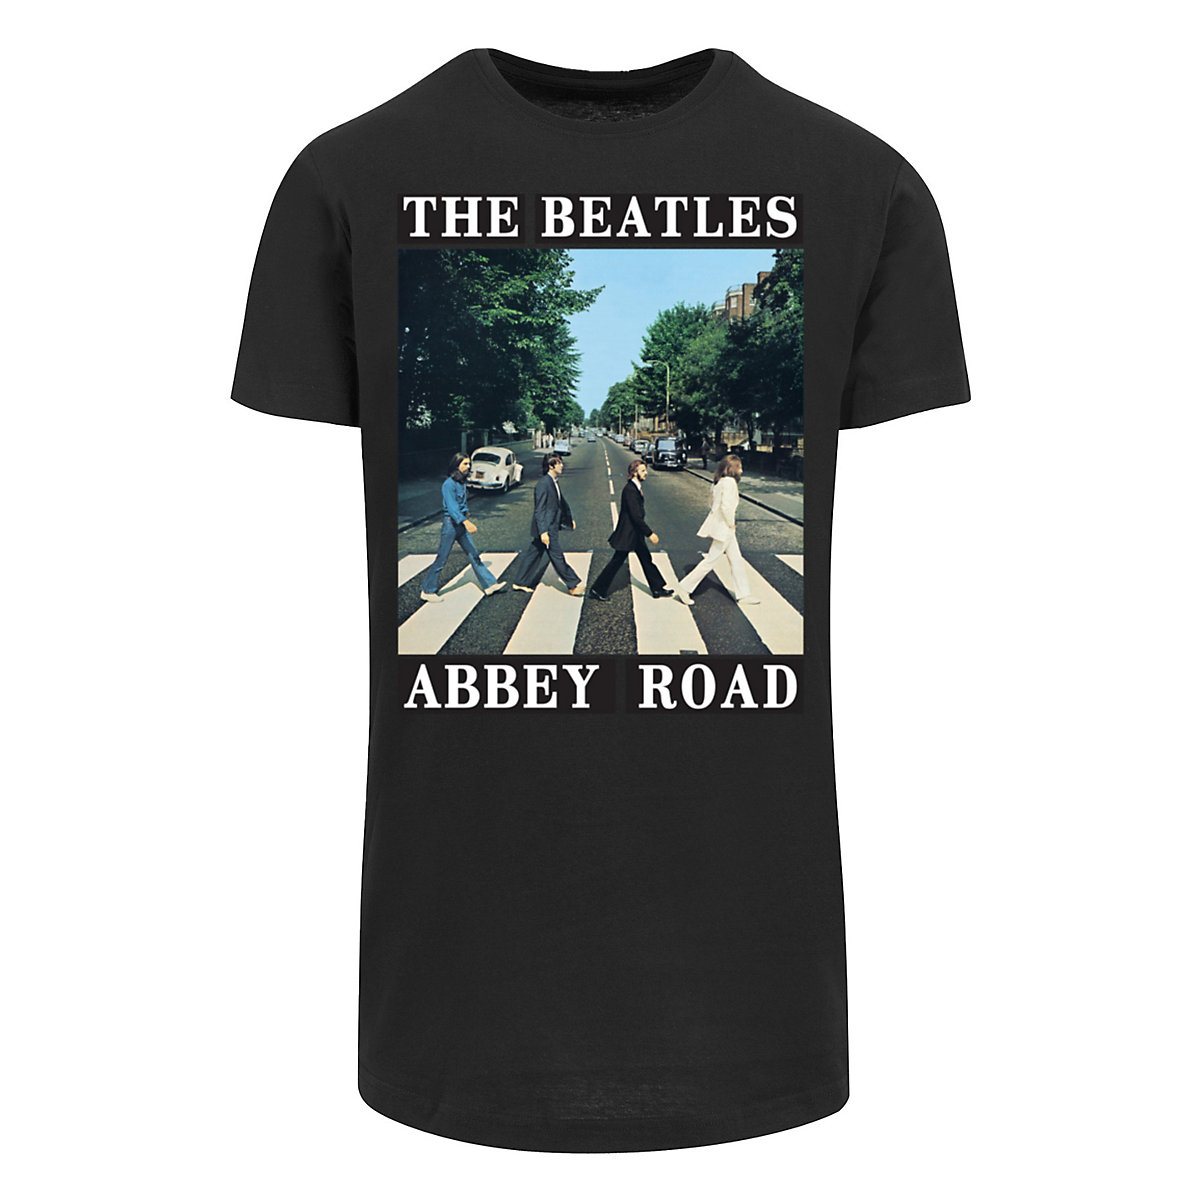 F4NT4STIC The Beatles Band Abbey Road T-Shirts schwarz